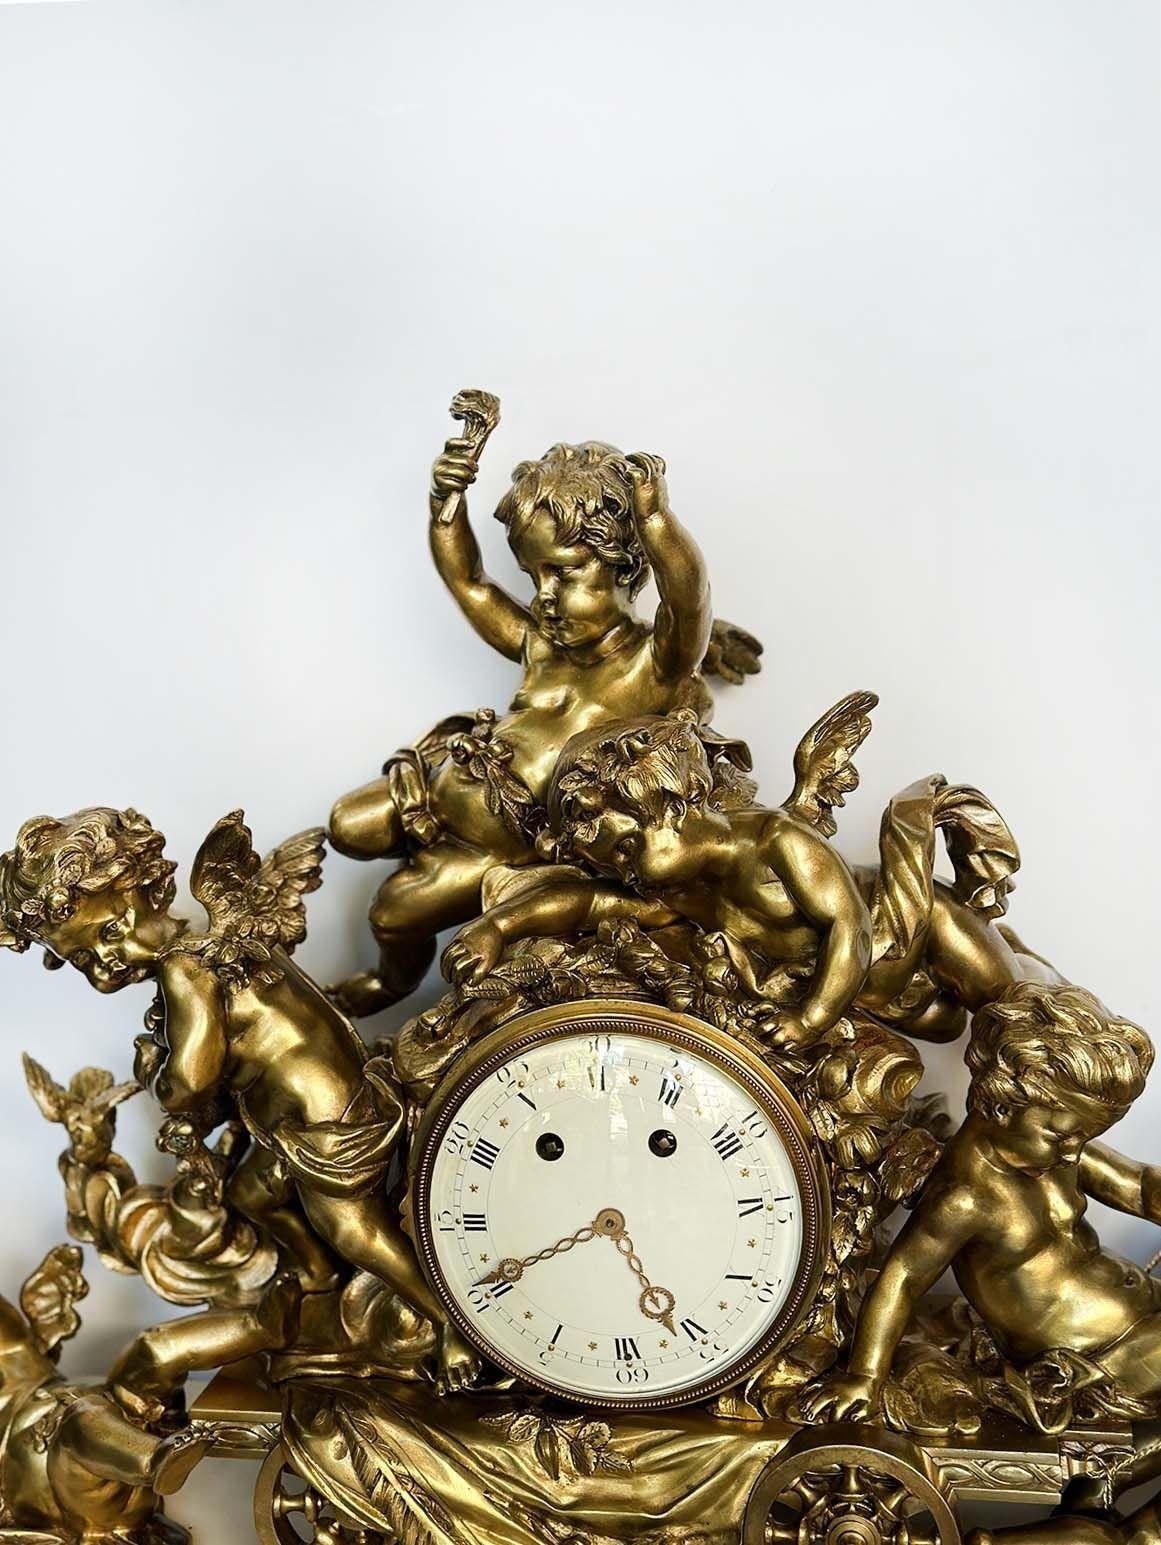 Palatial Louis XVI style mantel clock made of quality gilt bronze and fine marble with great detail all around. Depicts a group of putti figures atop of a celestial cart on a marble plinth supported by bun feet. 
Made in France, c. 1900's. Imported